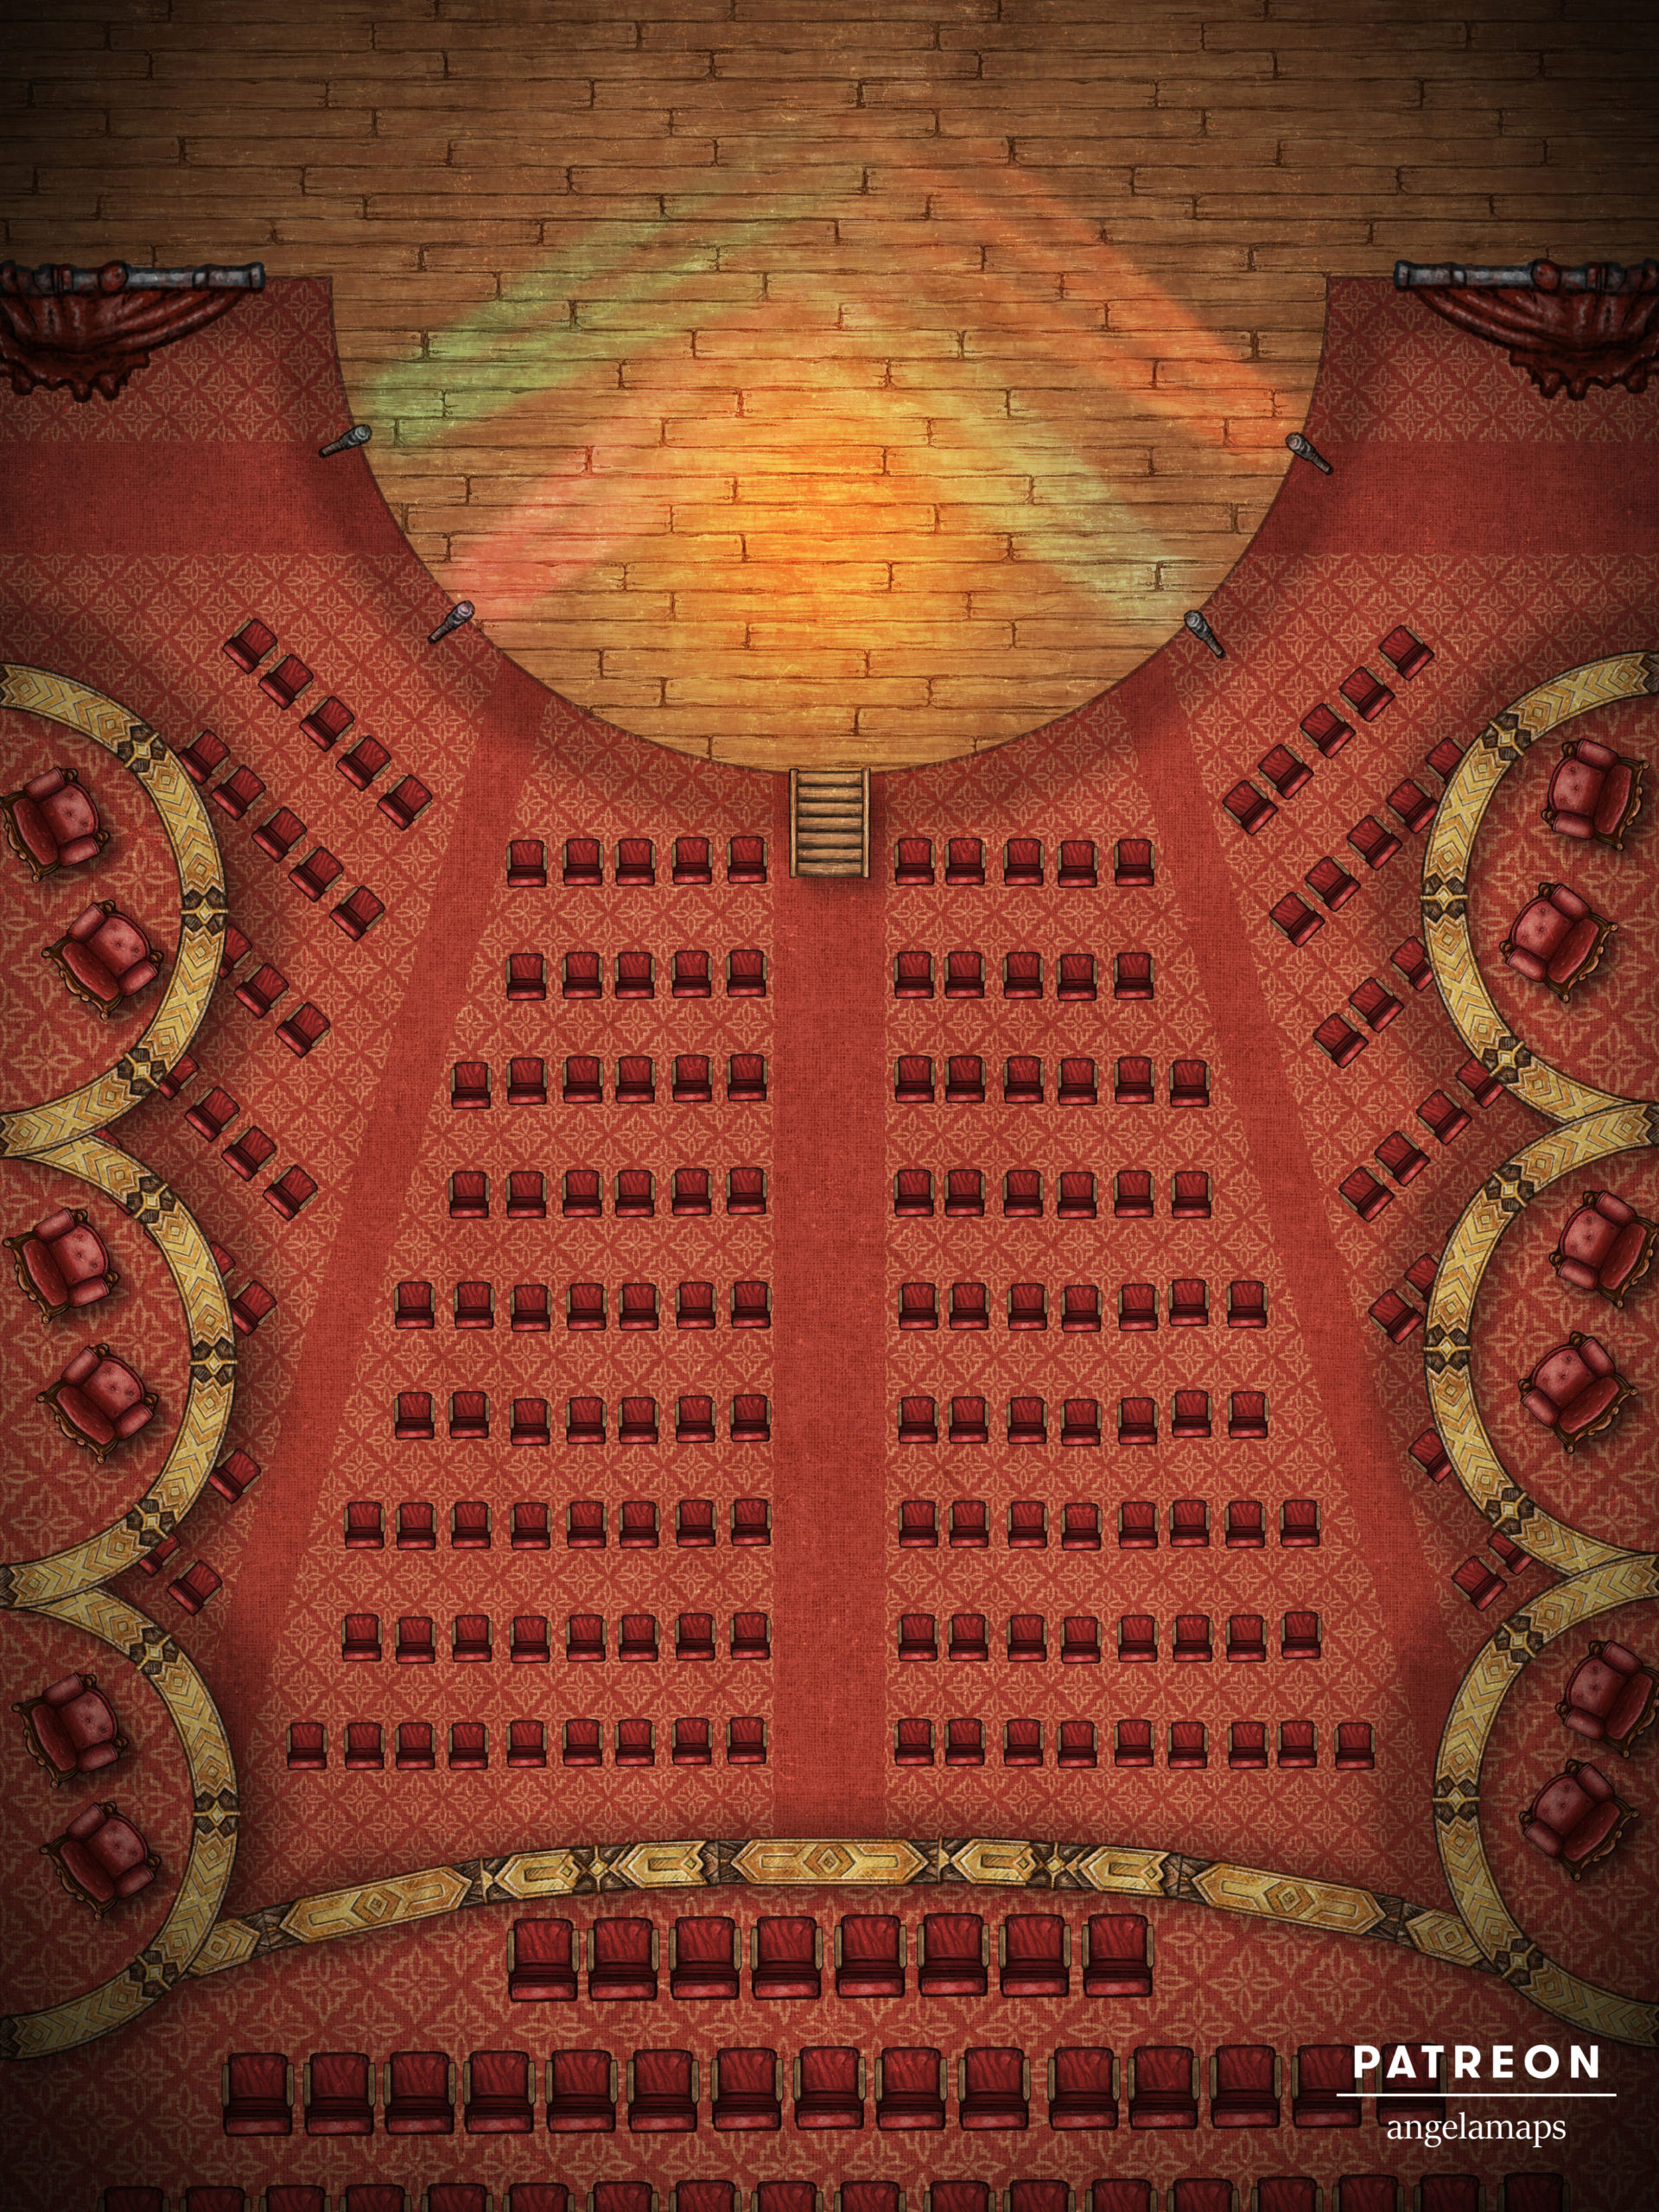 Opera house battle map for D&D and Pathfinder